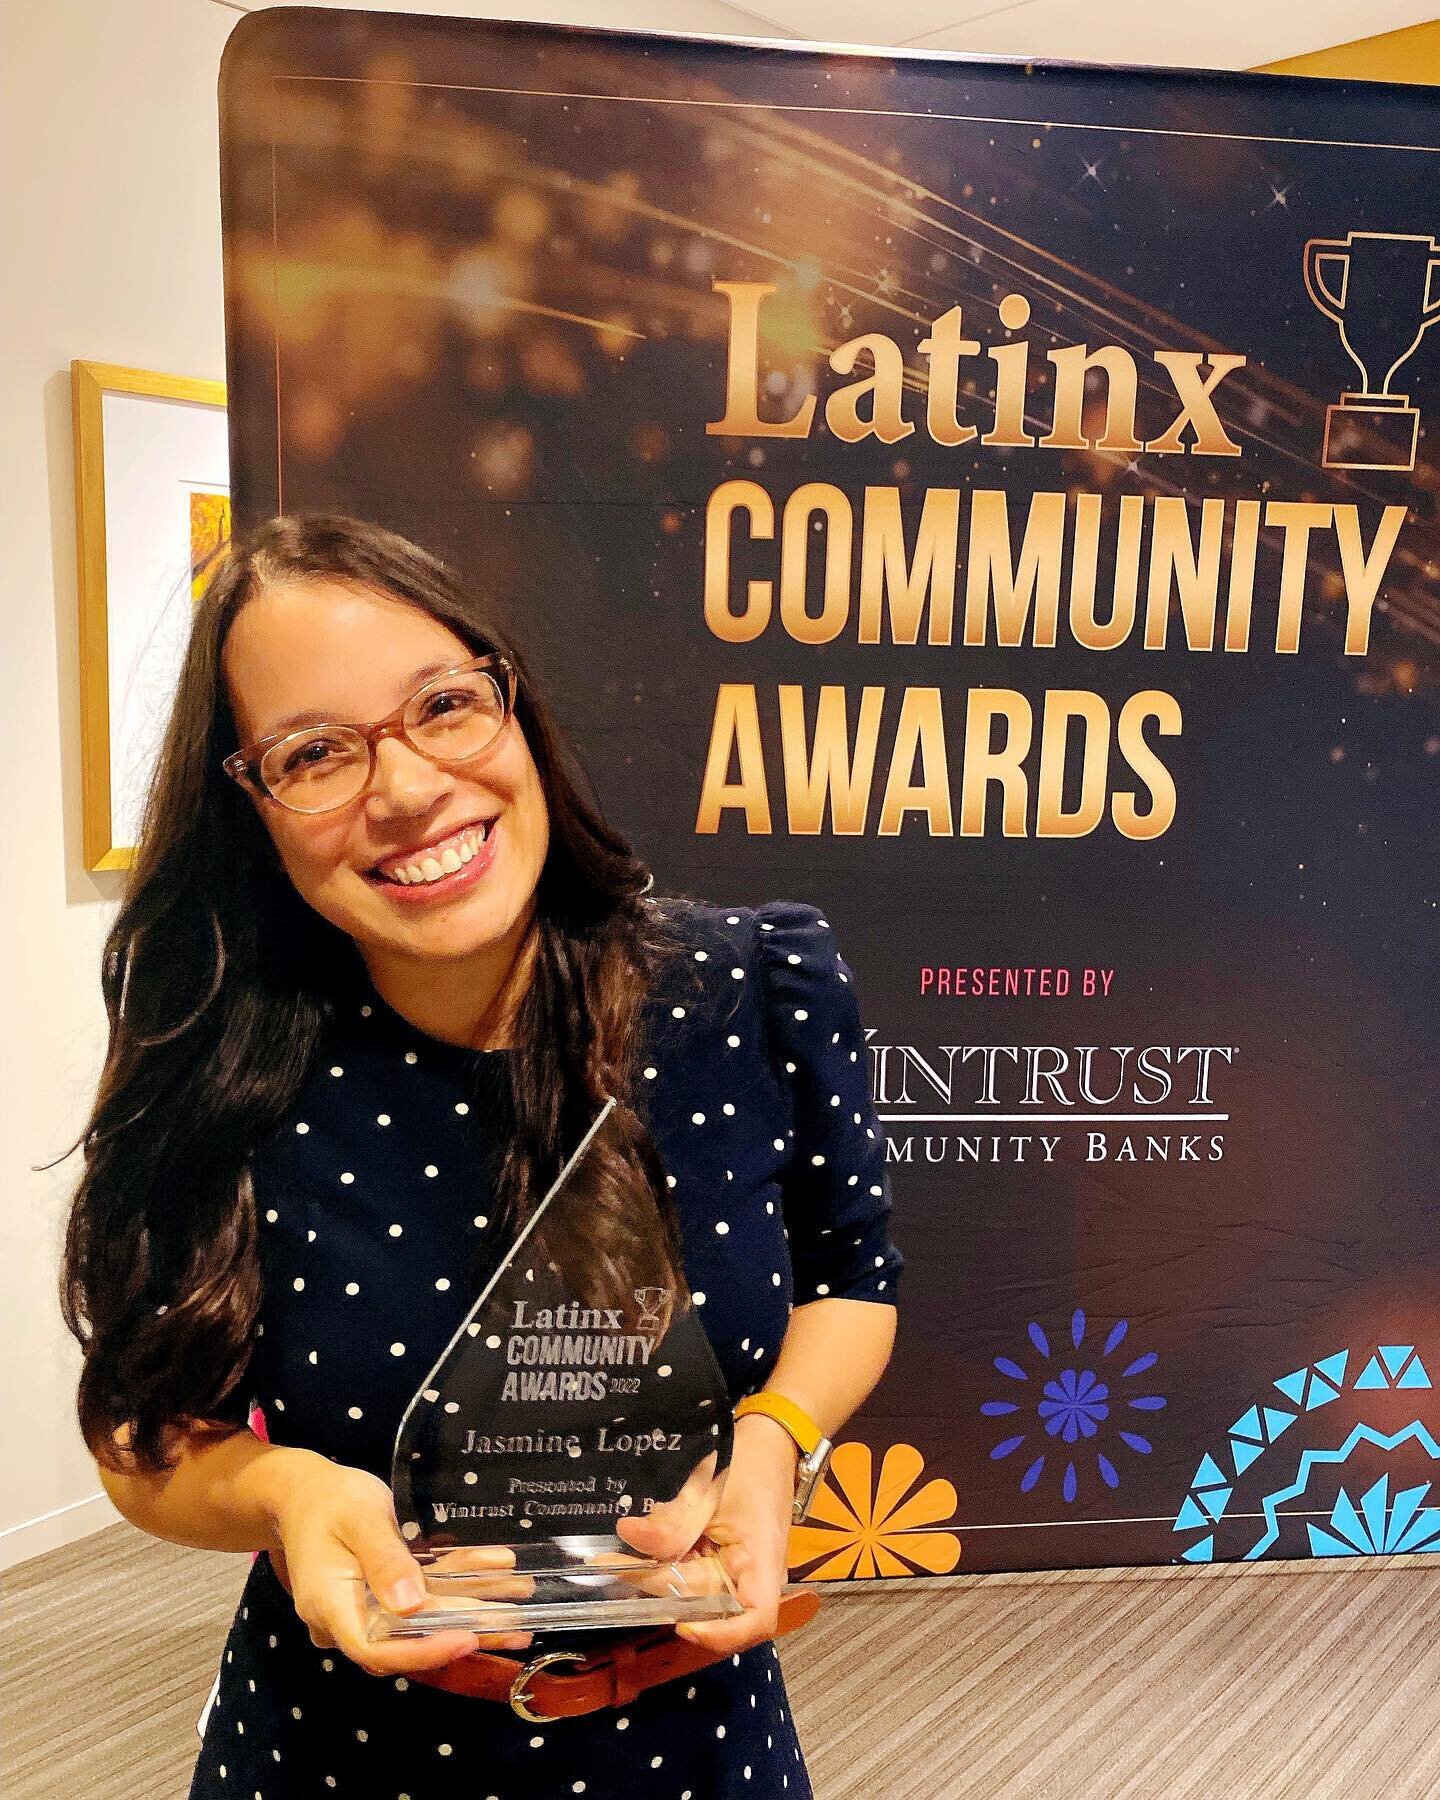 We want to offer a HUGE Congratulations to our Co-founder and Executive Director Jasmine Lopez for not only being nominated but actually winning at Latinx Community Awards on Monday. Jasmine has worked tirelessly in our community to ensure that young